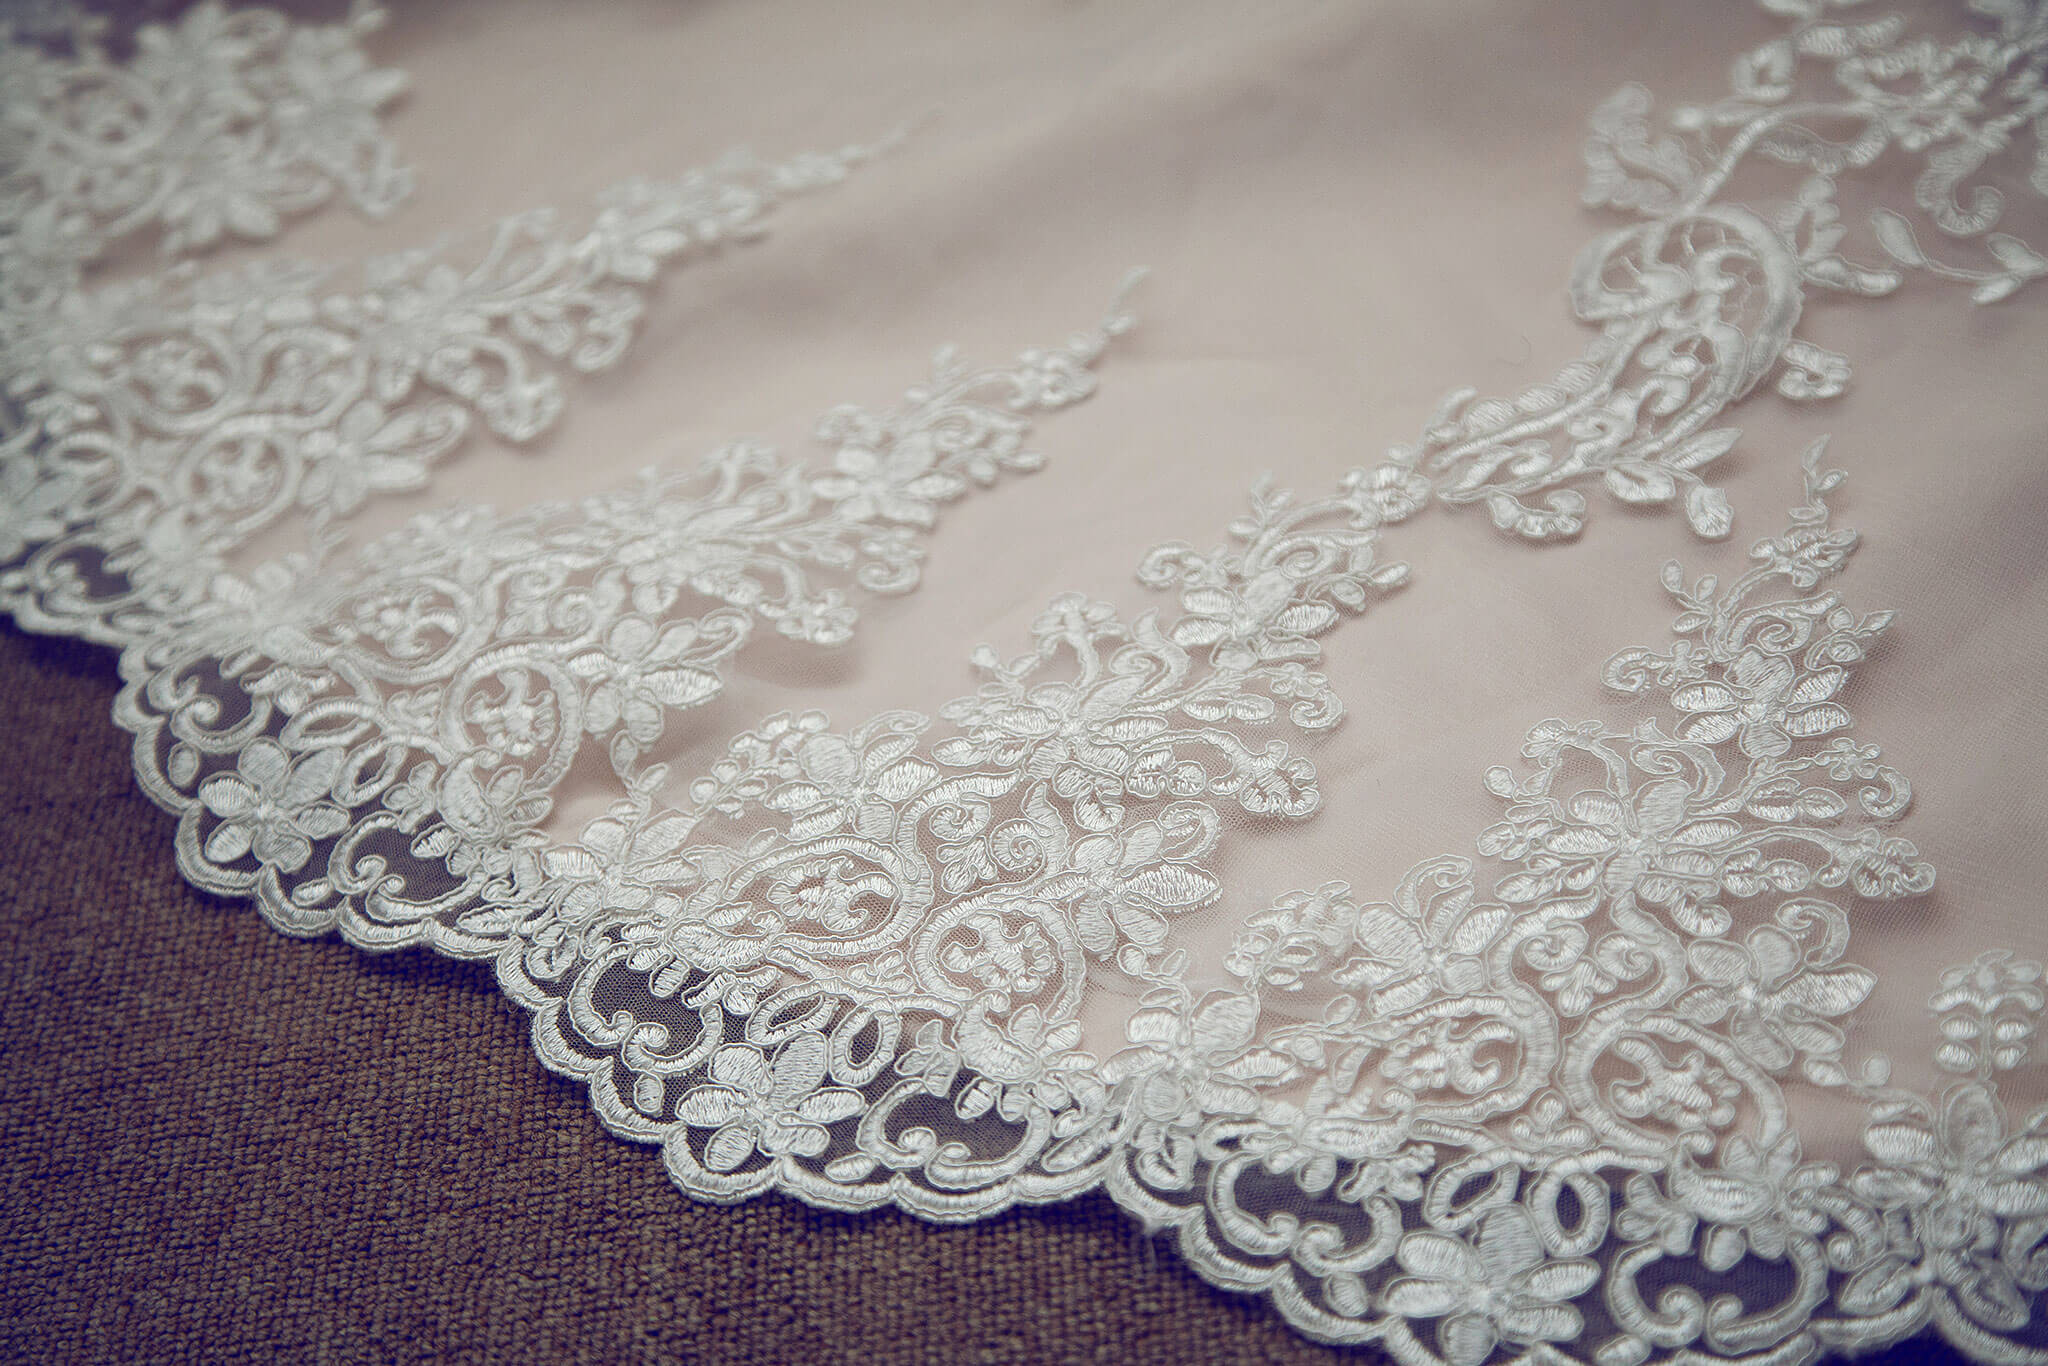 Popular Types of Bridal Lace Fabric in Australia